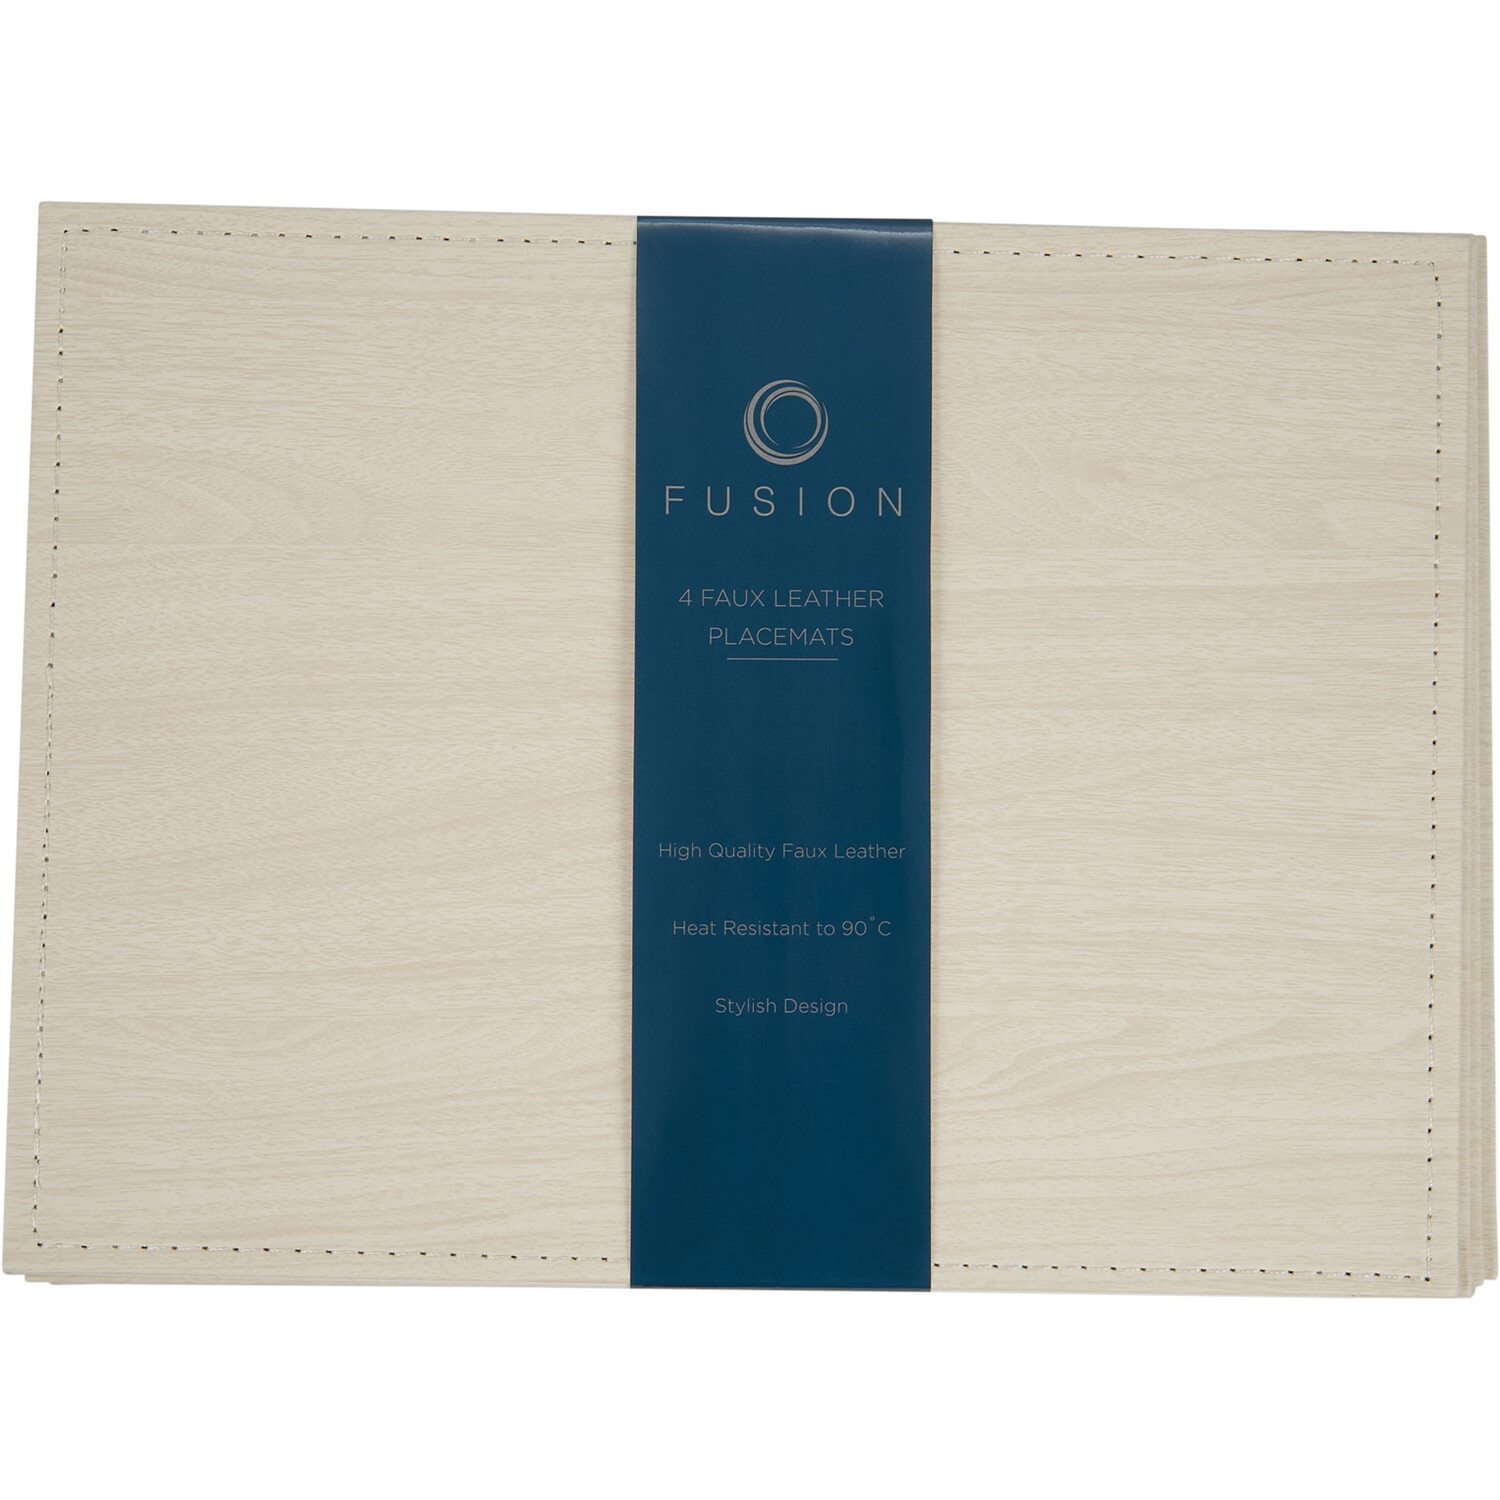 Pack of 4 Fusion Faux Leather Placemats - Natural Image 1